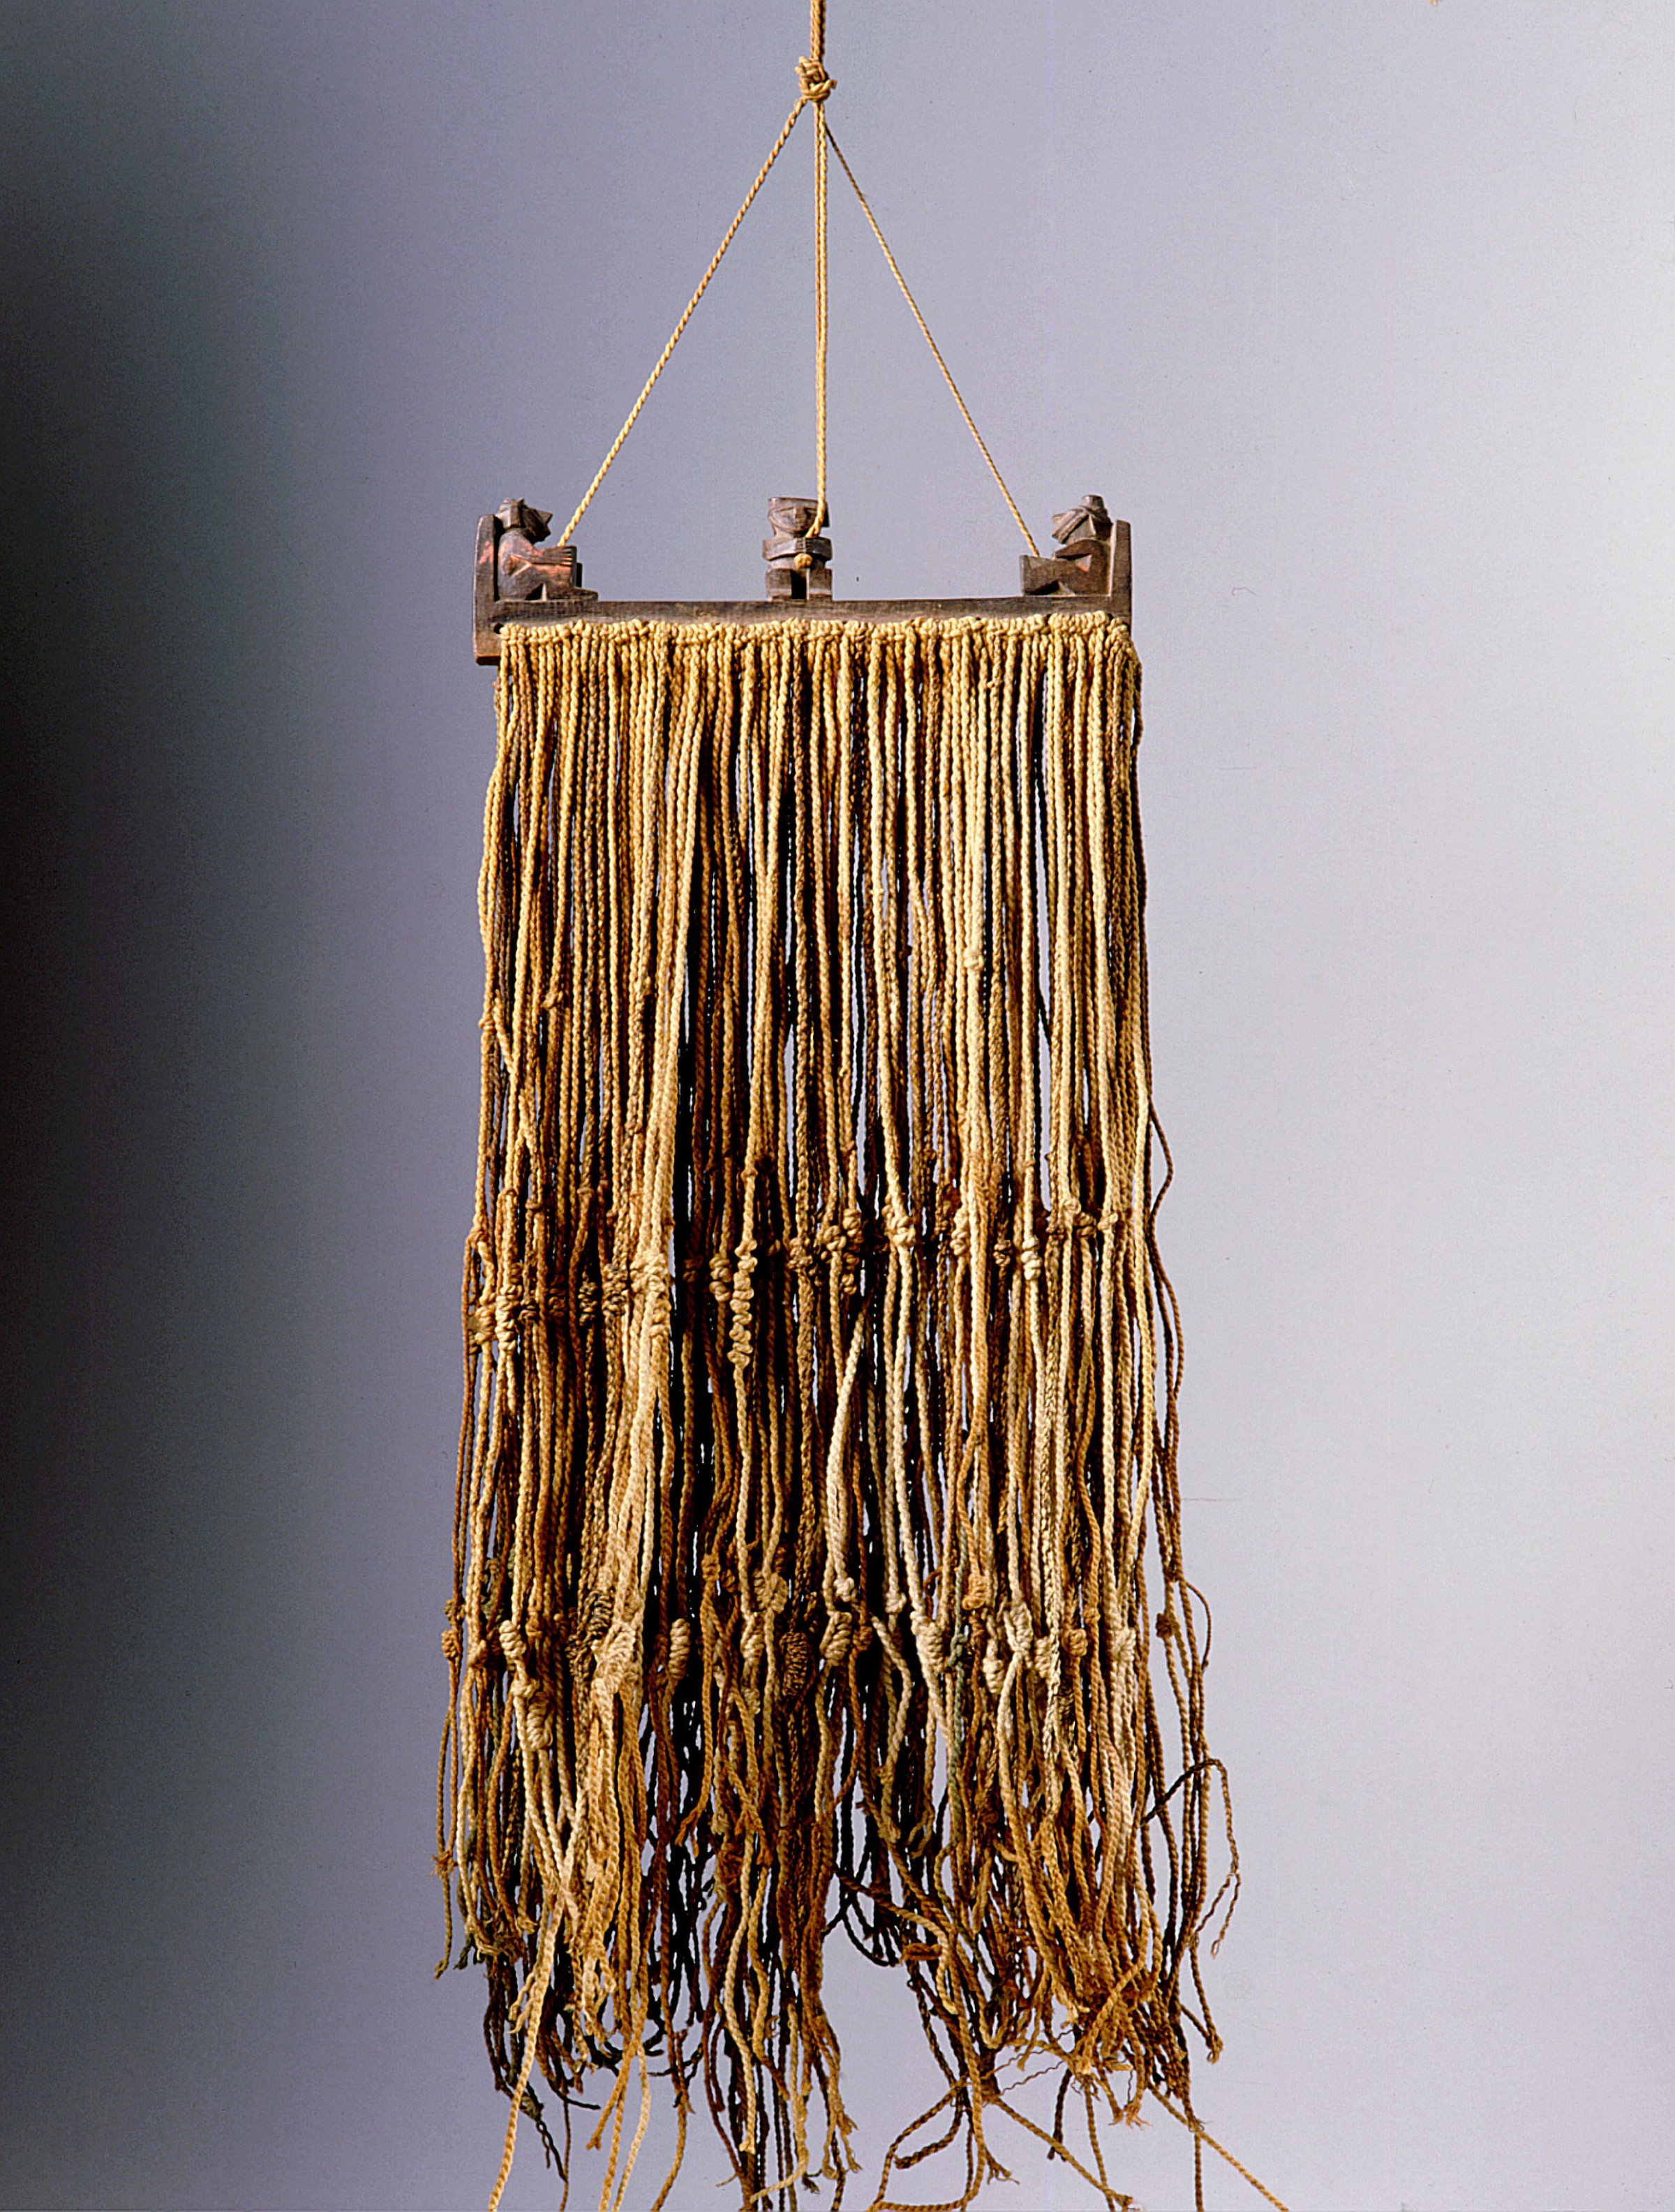 The quipu was a series of knotted strings by which the Inca kept their administrative records, though a moreesoteric function cannot be ruled out